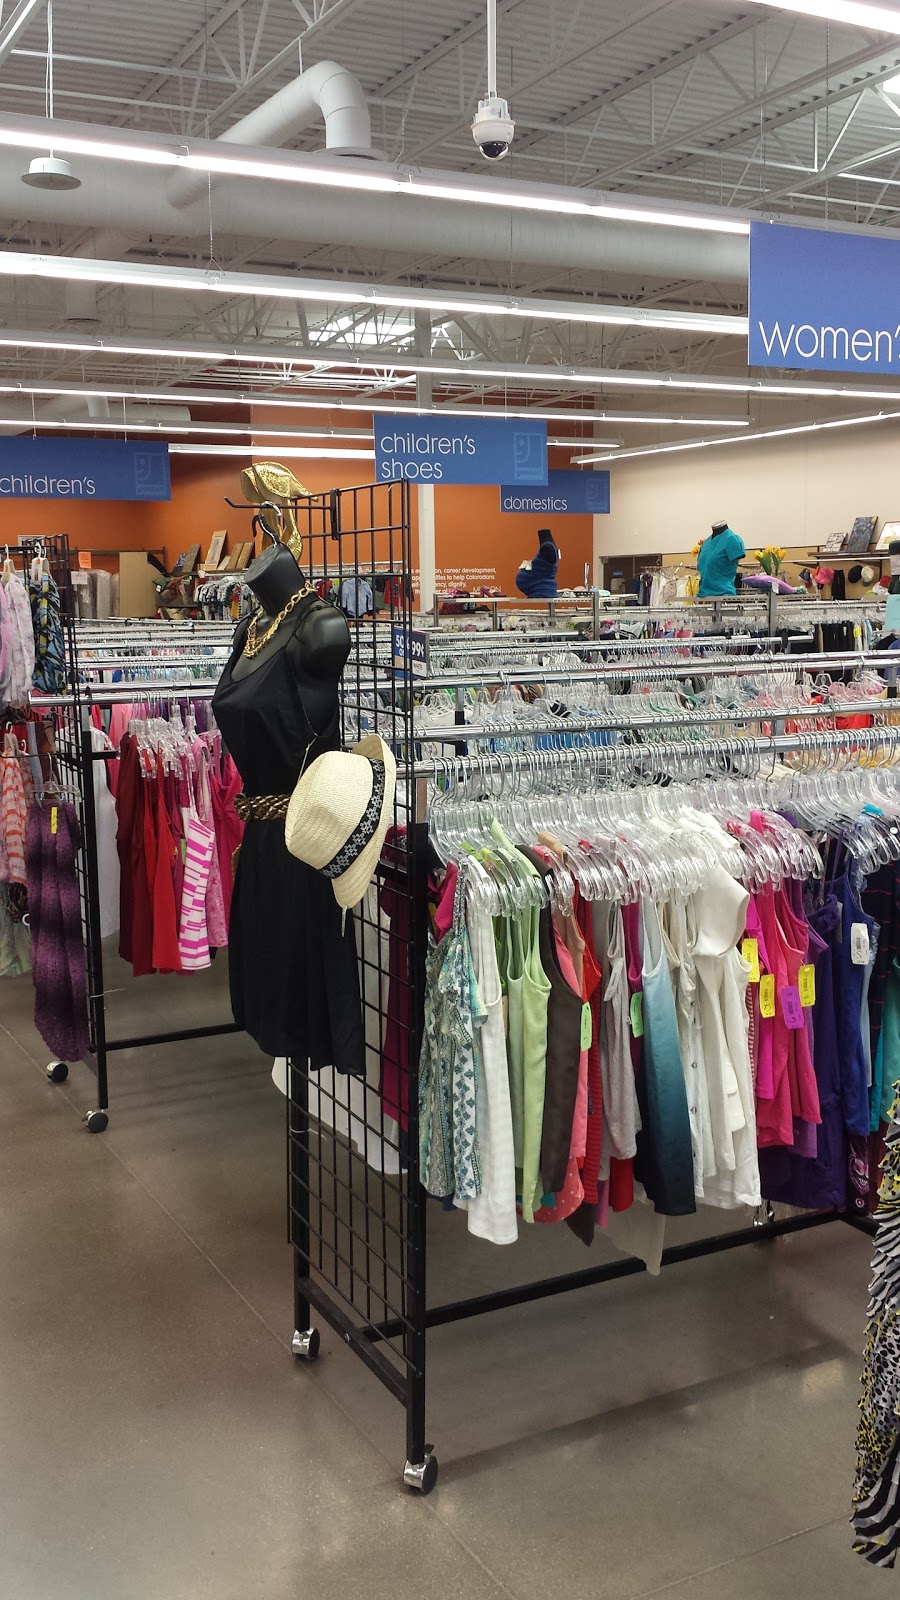 Goodwill Broomfield Store | 4775 W 121st Ave, Broomfield, CO 80020, USA | Phone: (303) 202-3040